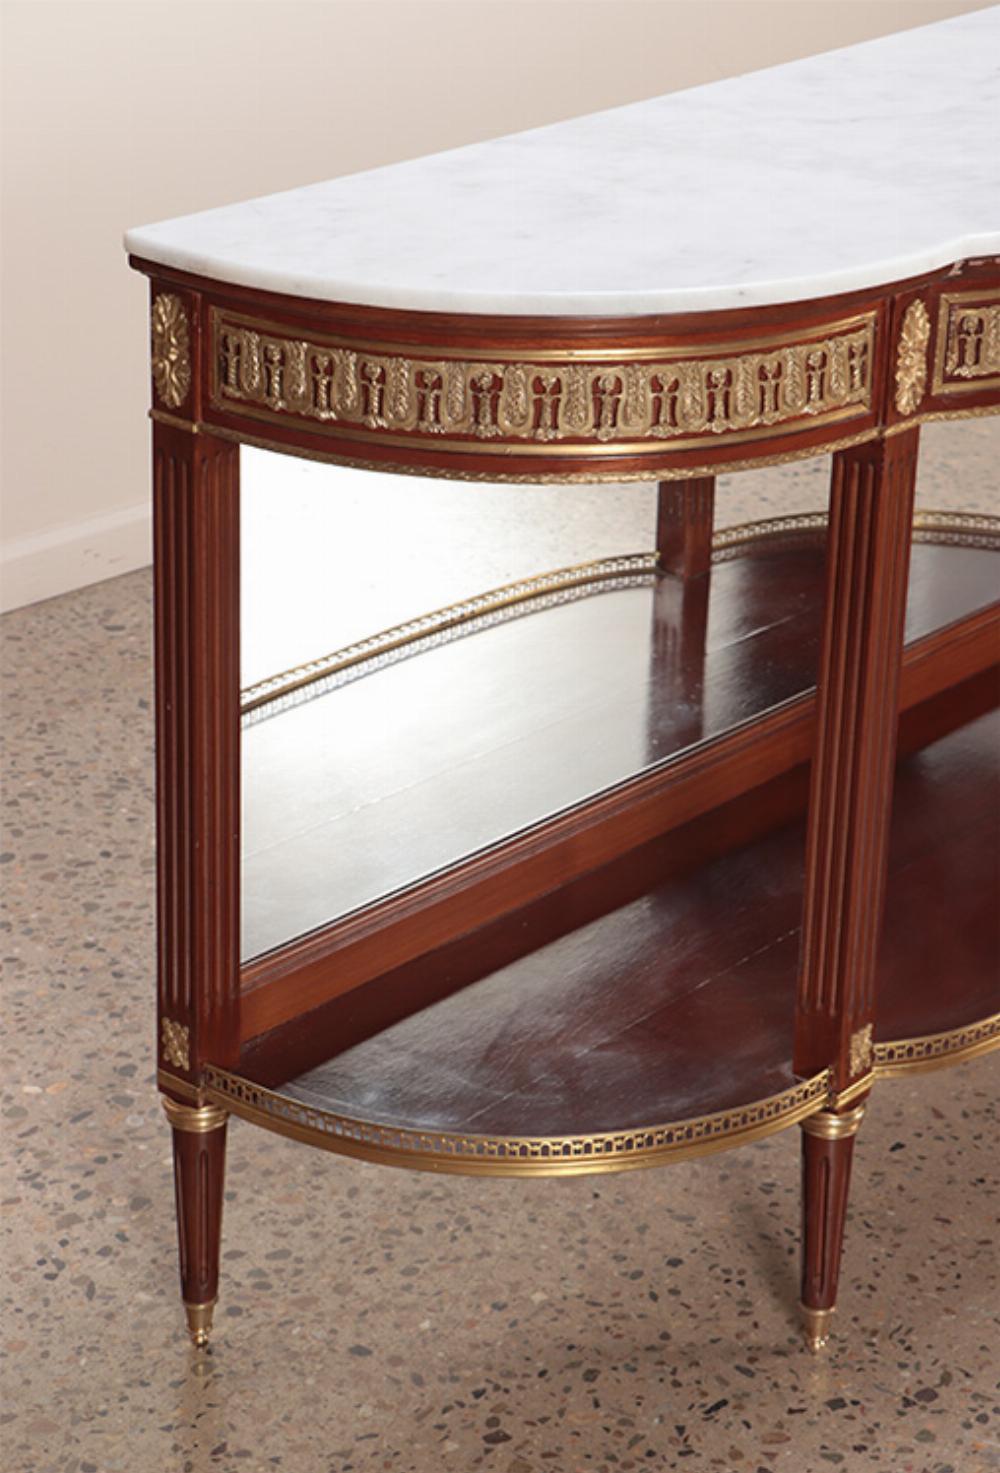 Mahogany bronze mounted Louis XVI style marble top console table with mirrored back.